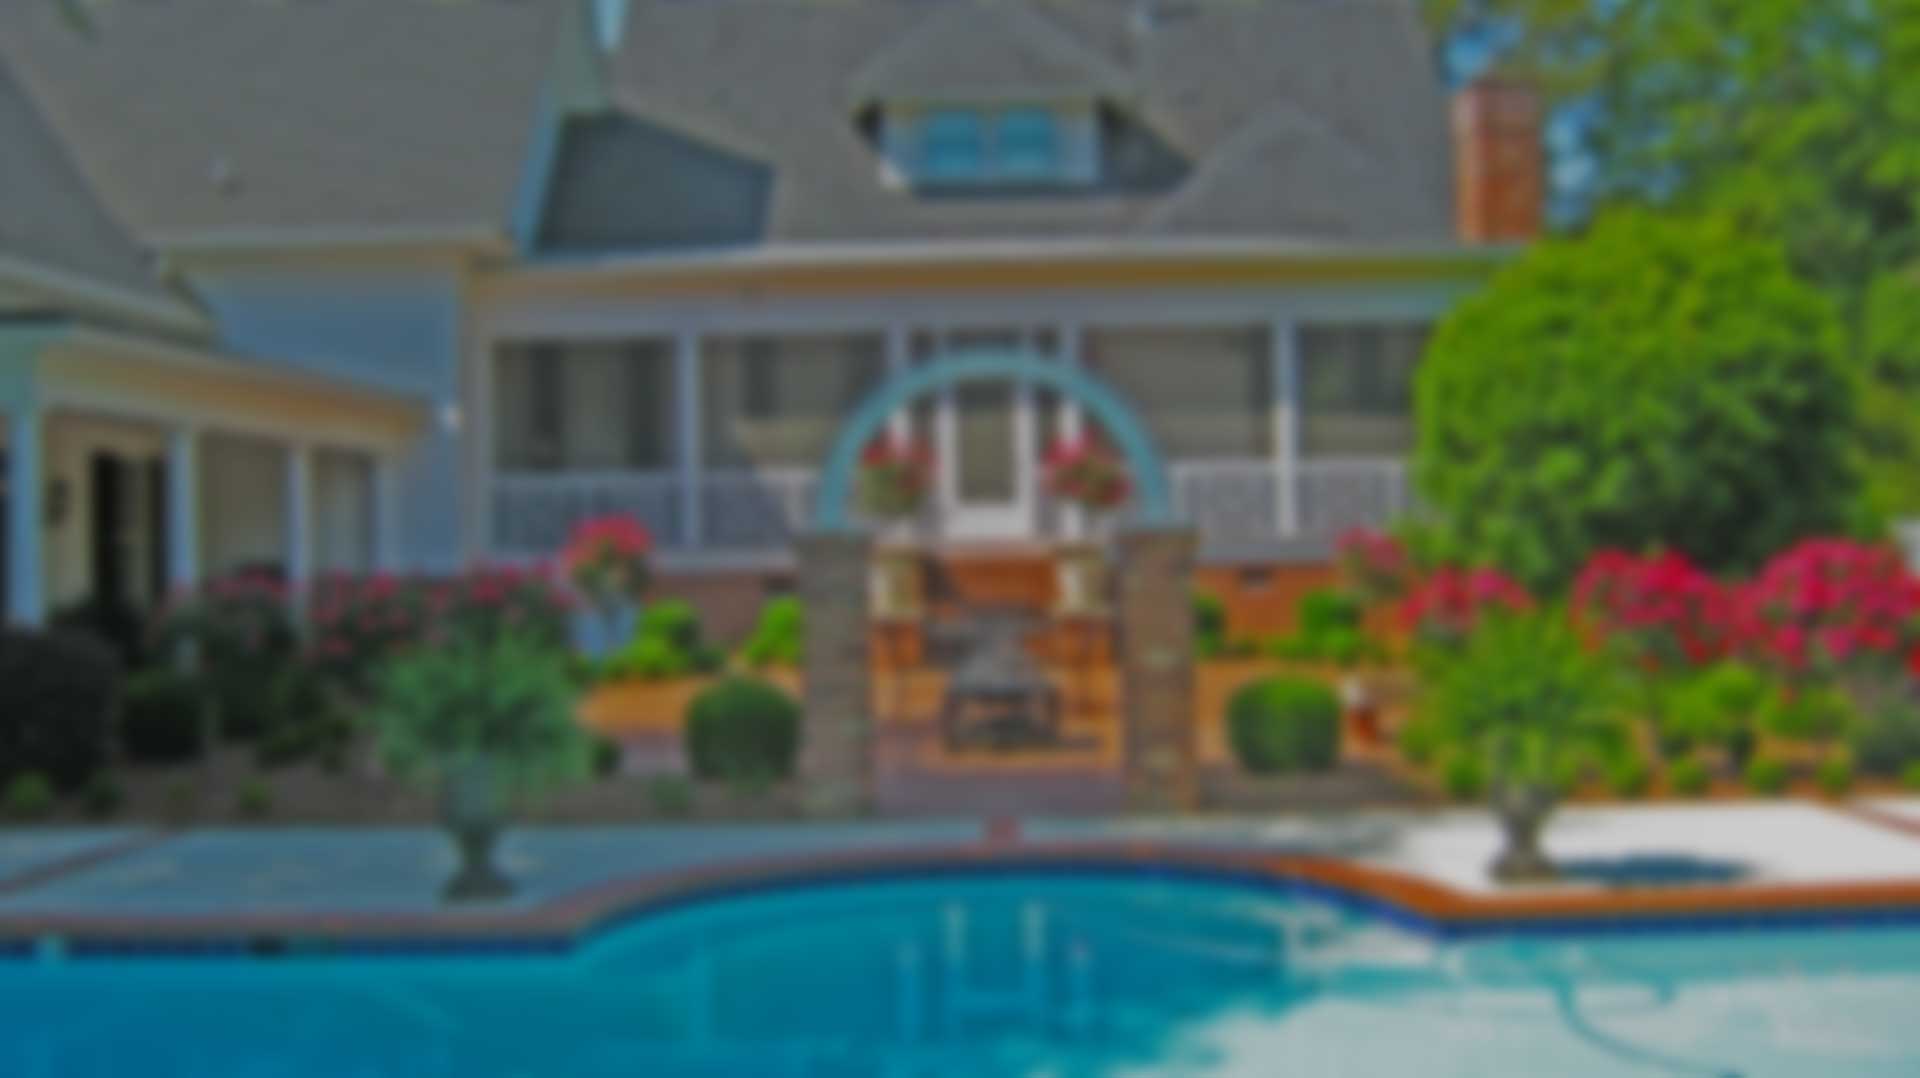 Blurred landscape project around pool.